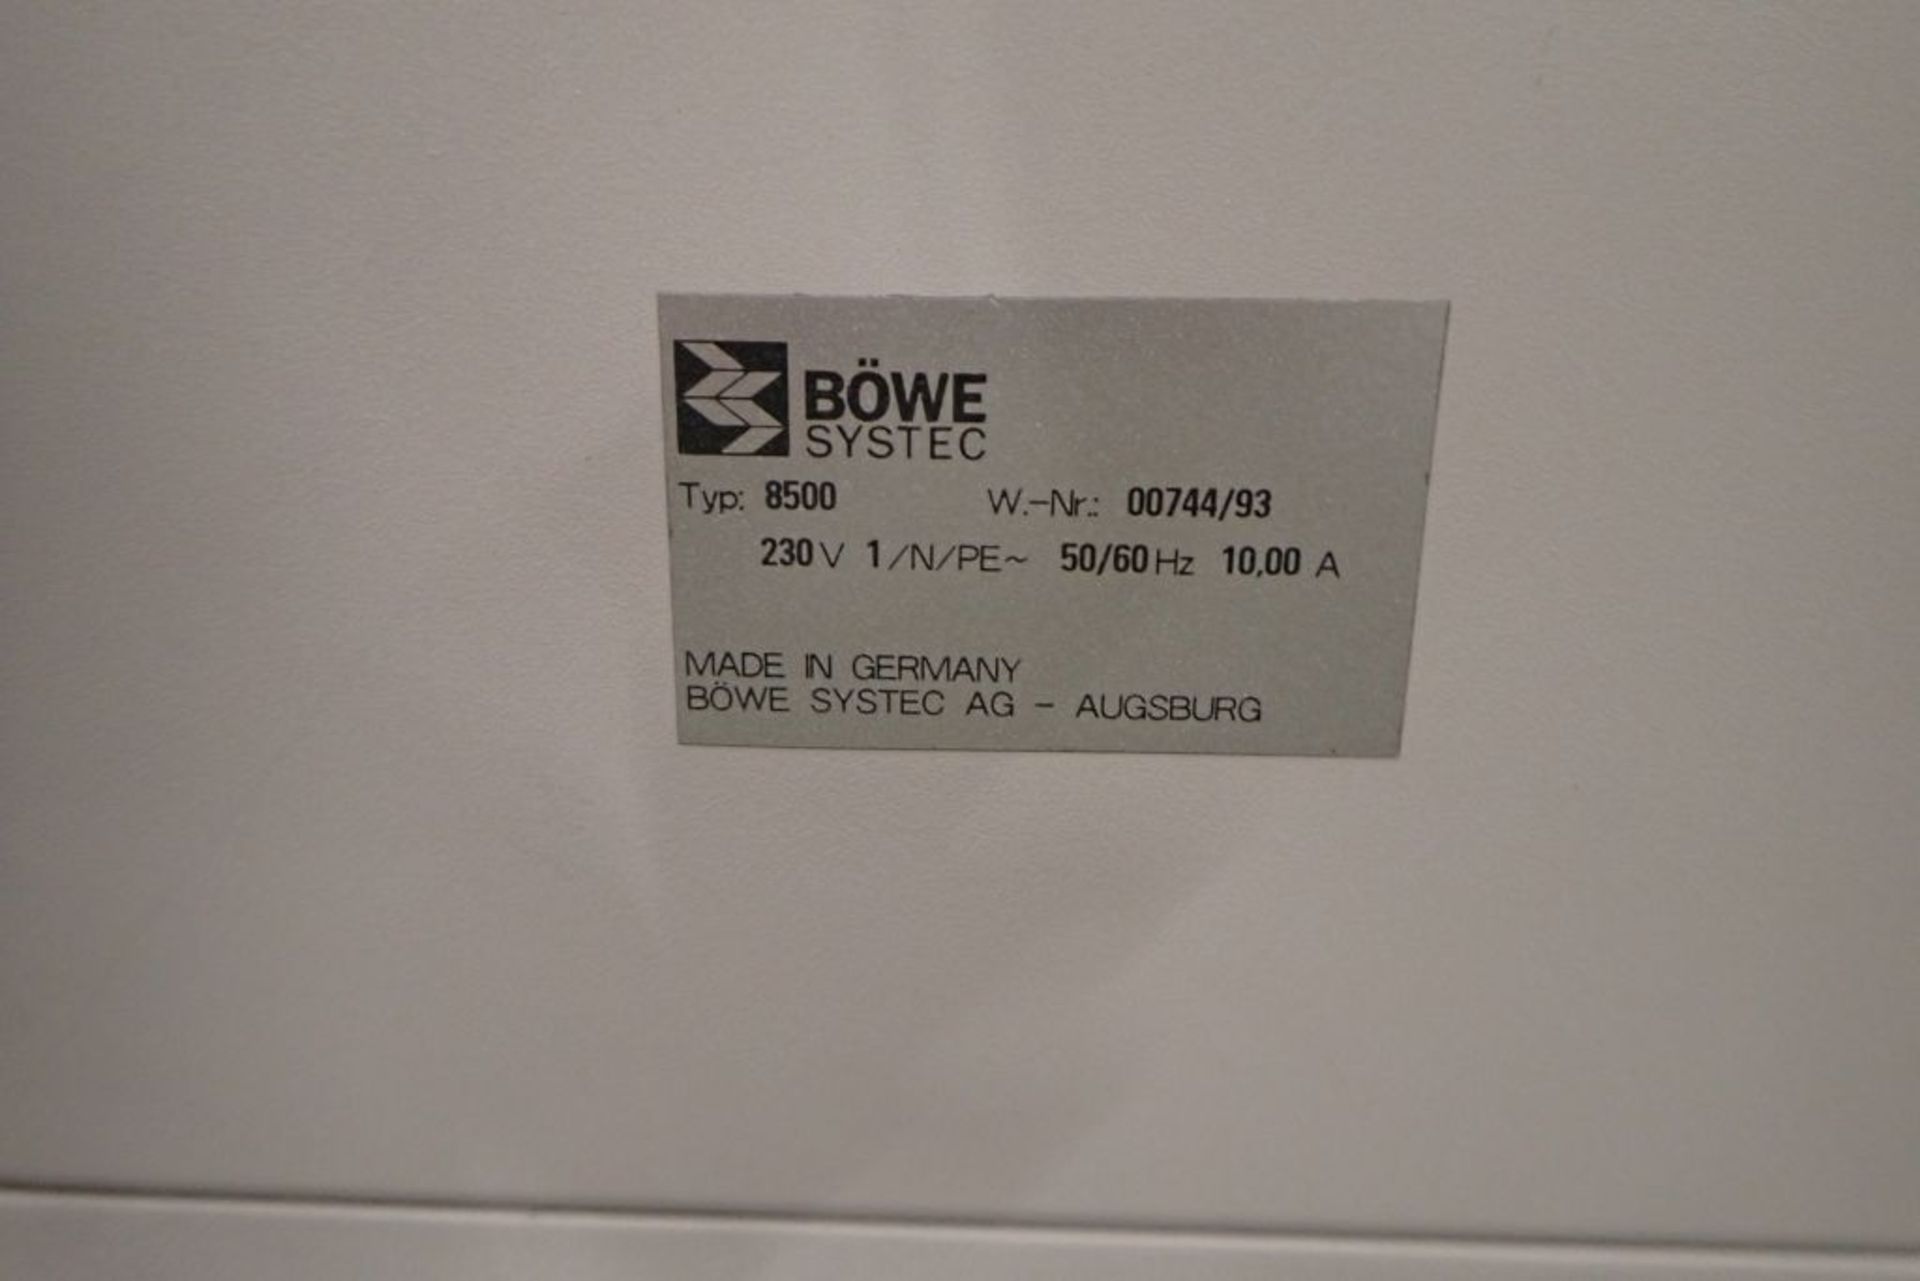 Bowe Systec Turbo Premium Automatic Mailing System - Image 278 of 297